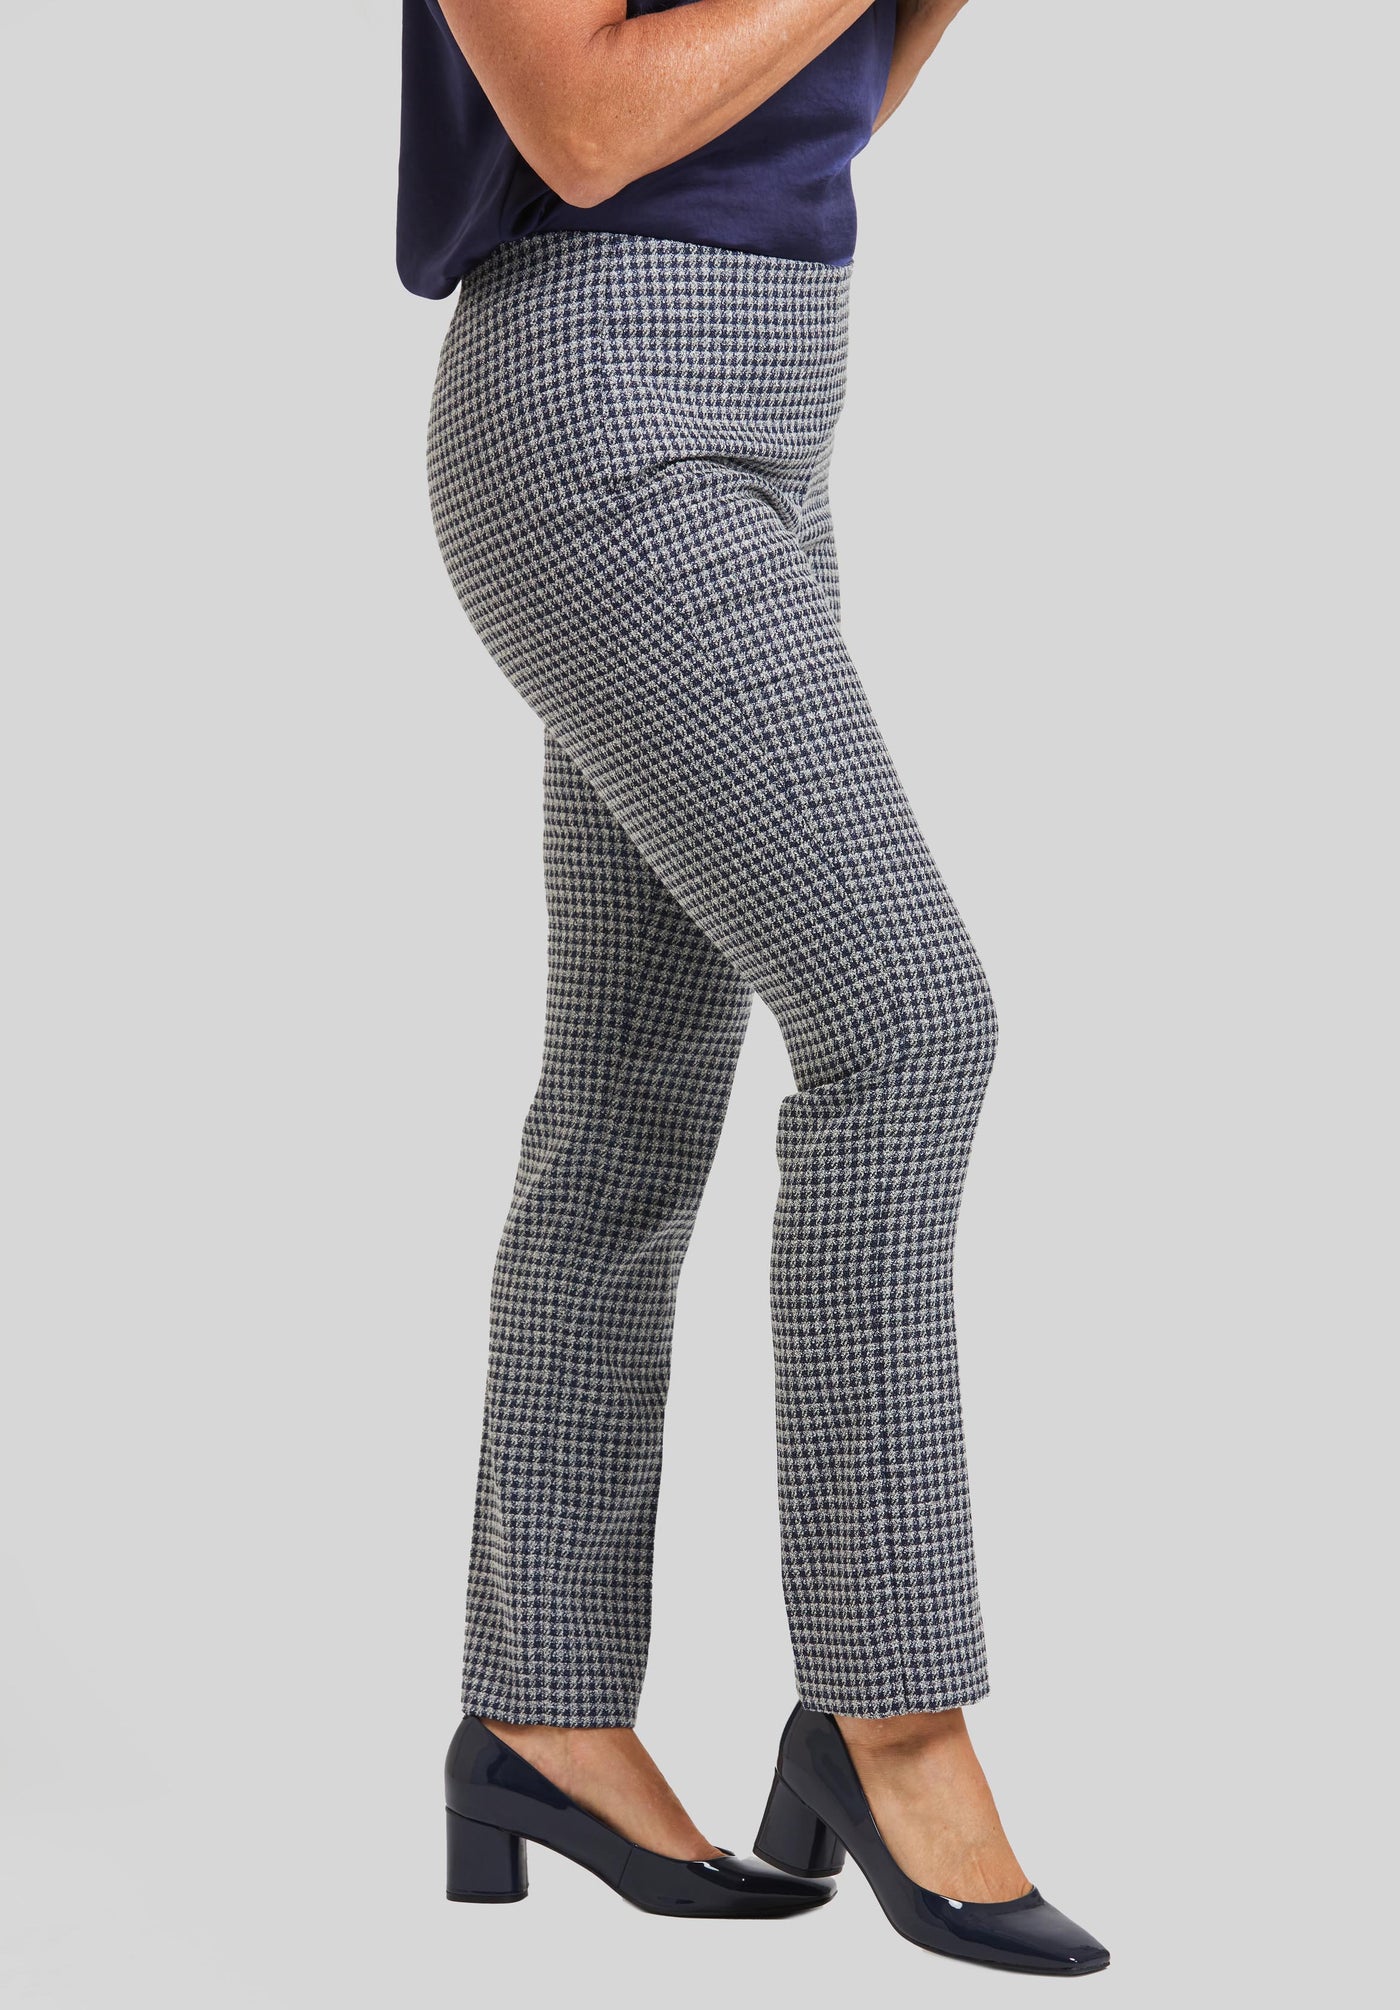 Brussels Metallic Check Annie Pull On Pant